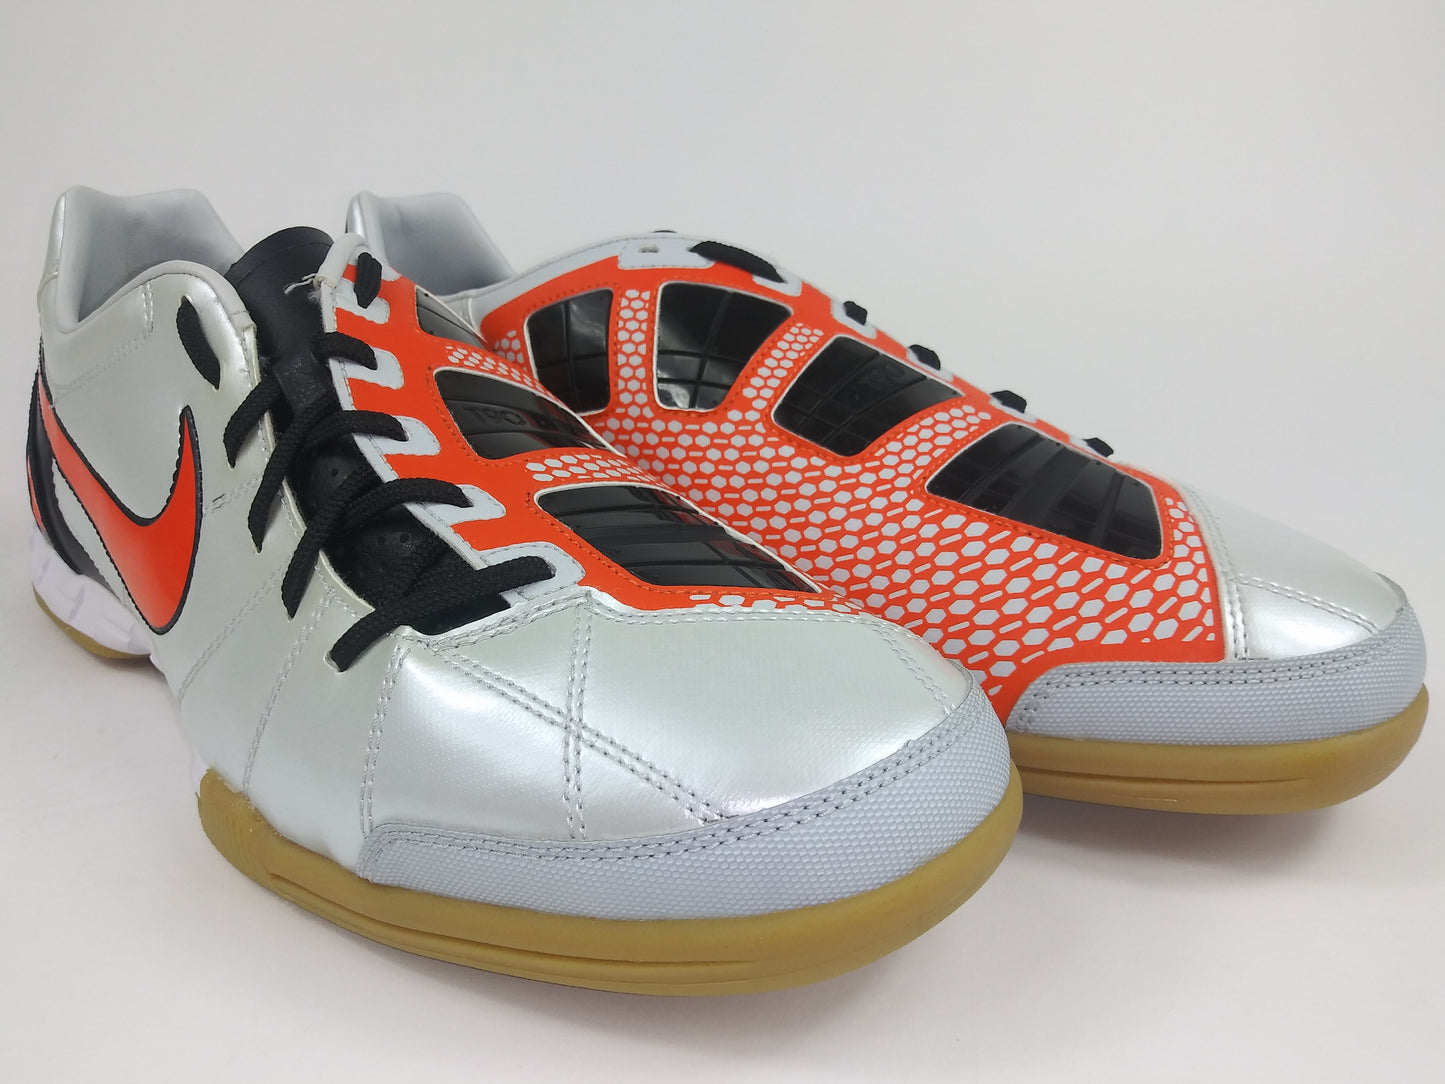 Nike Total90 Shoot lll IC Indoor Shoes White Orange